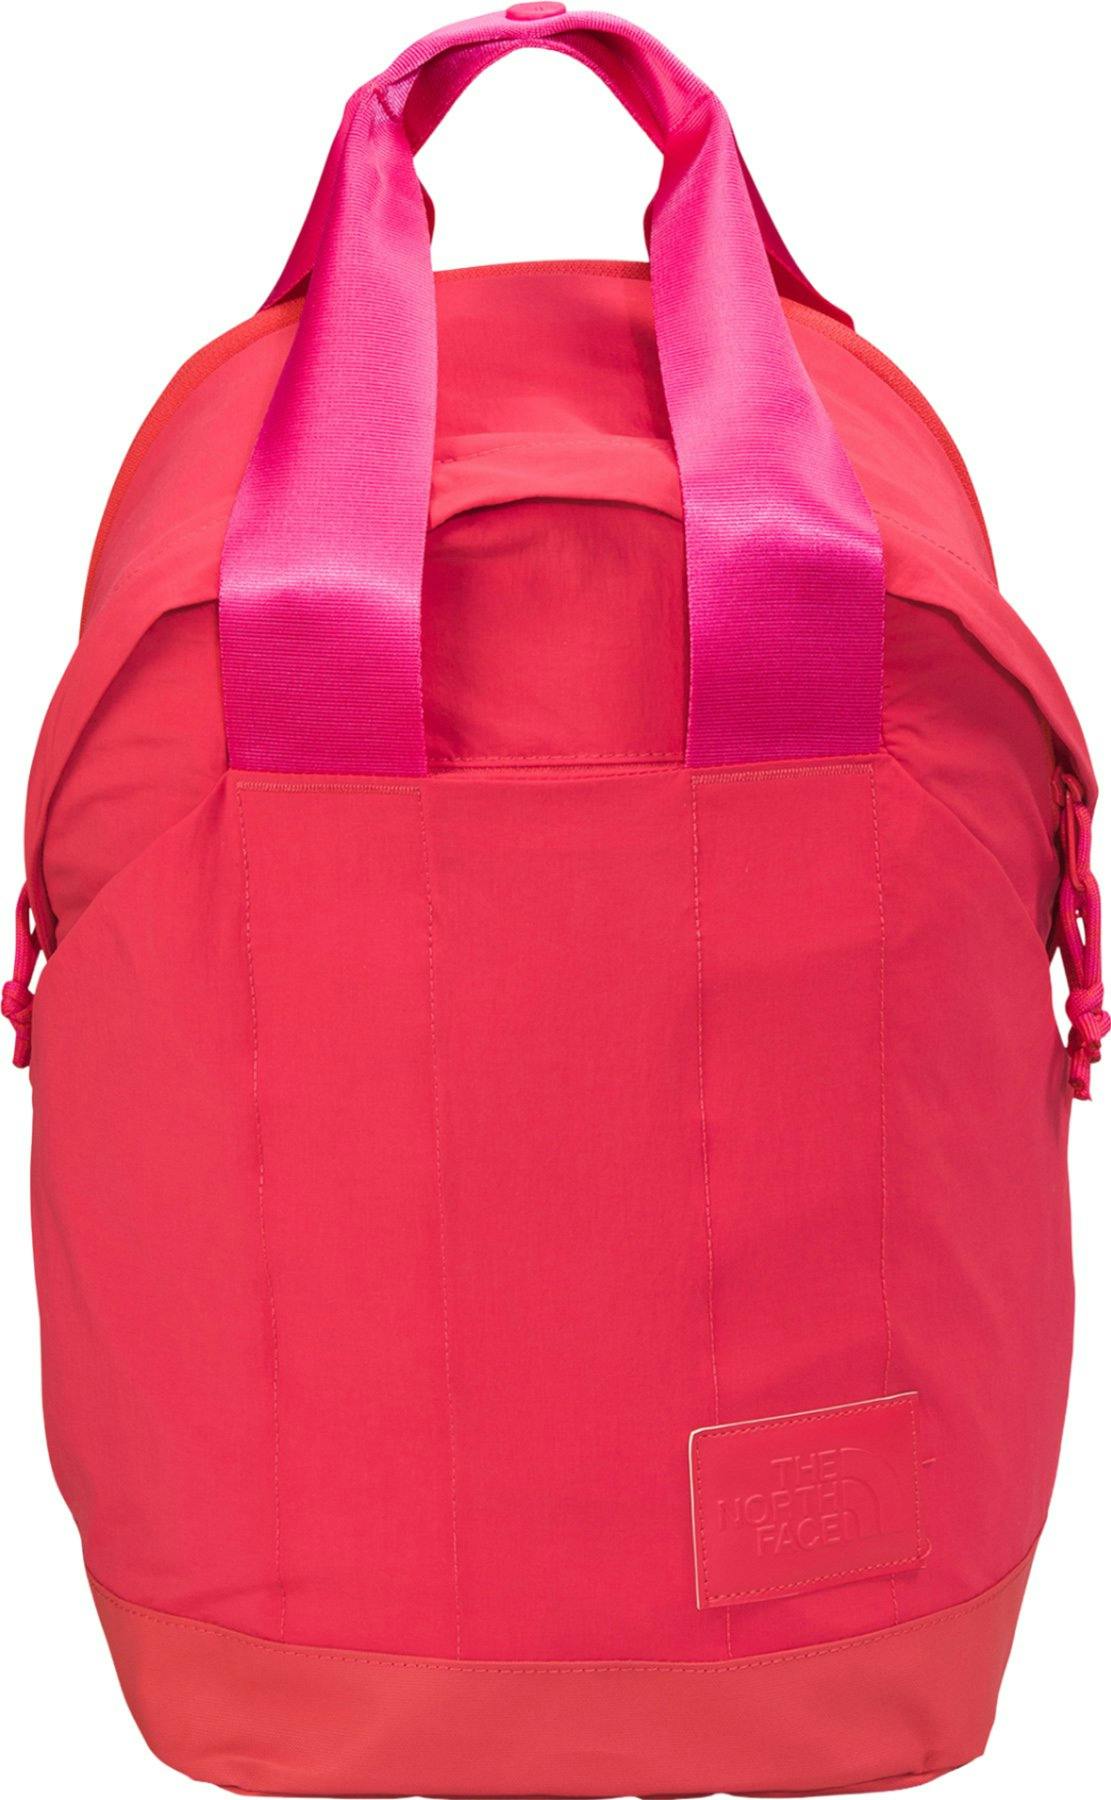 Product image for Never Stop Daypack 20L - Women’s